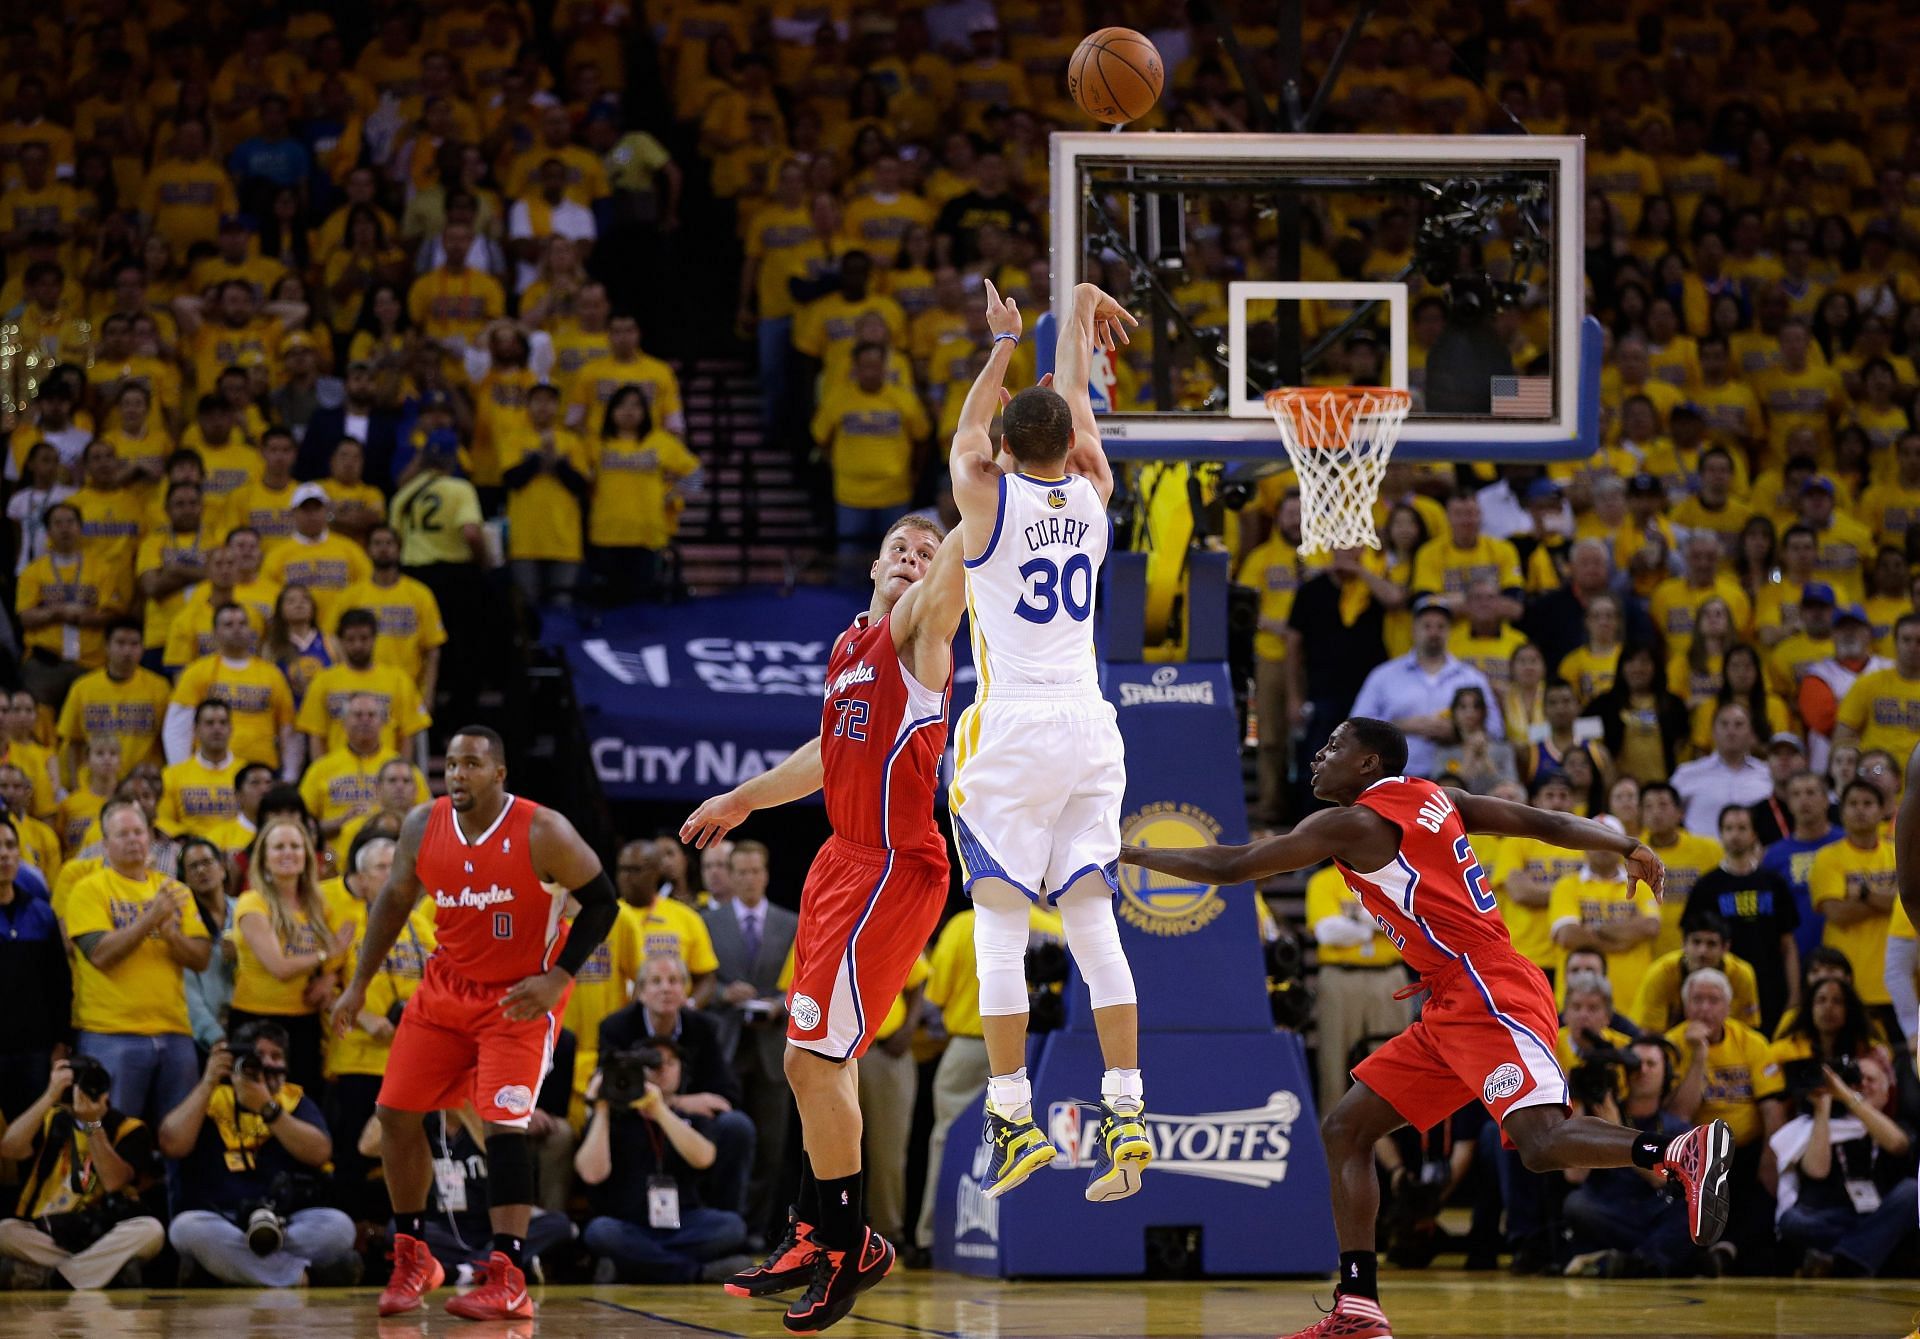 Stephen Curry shooting past Blake Griffin during the 2014 playoffs